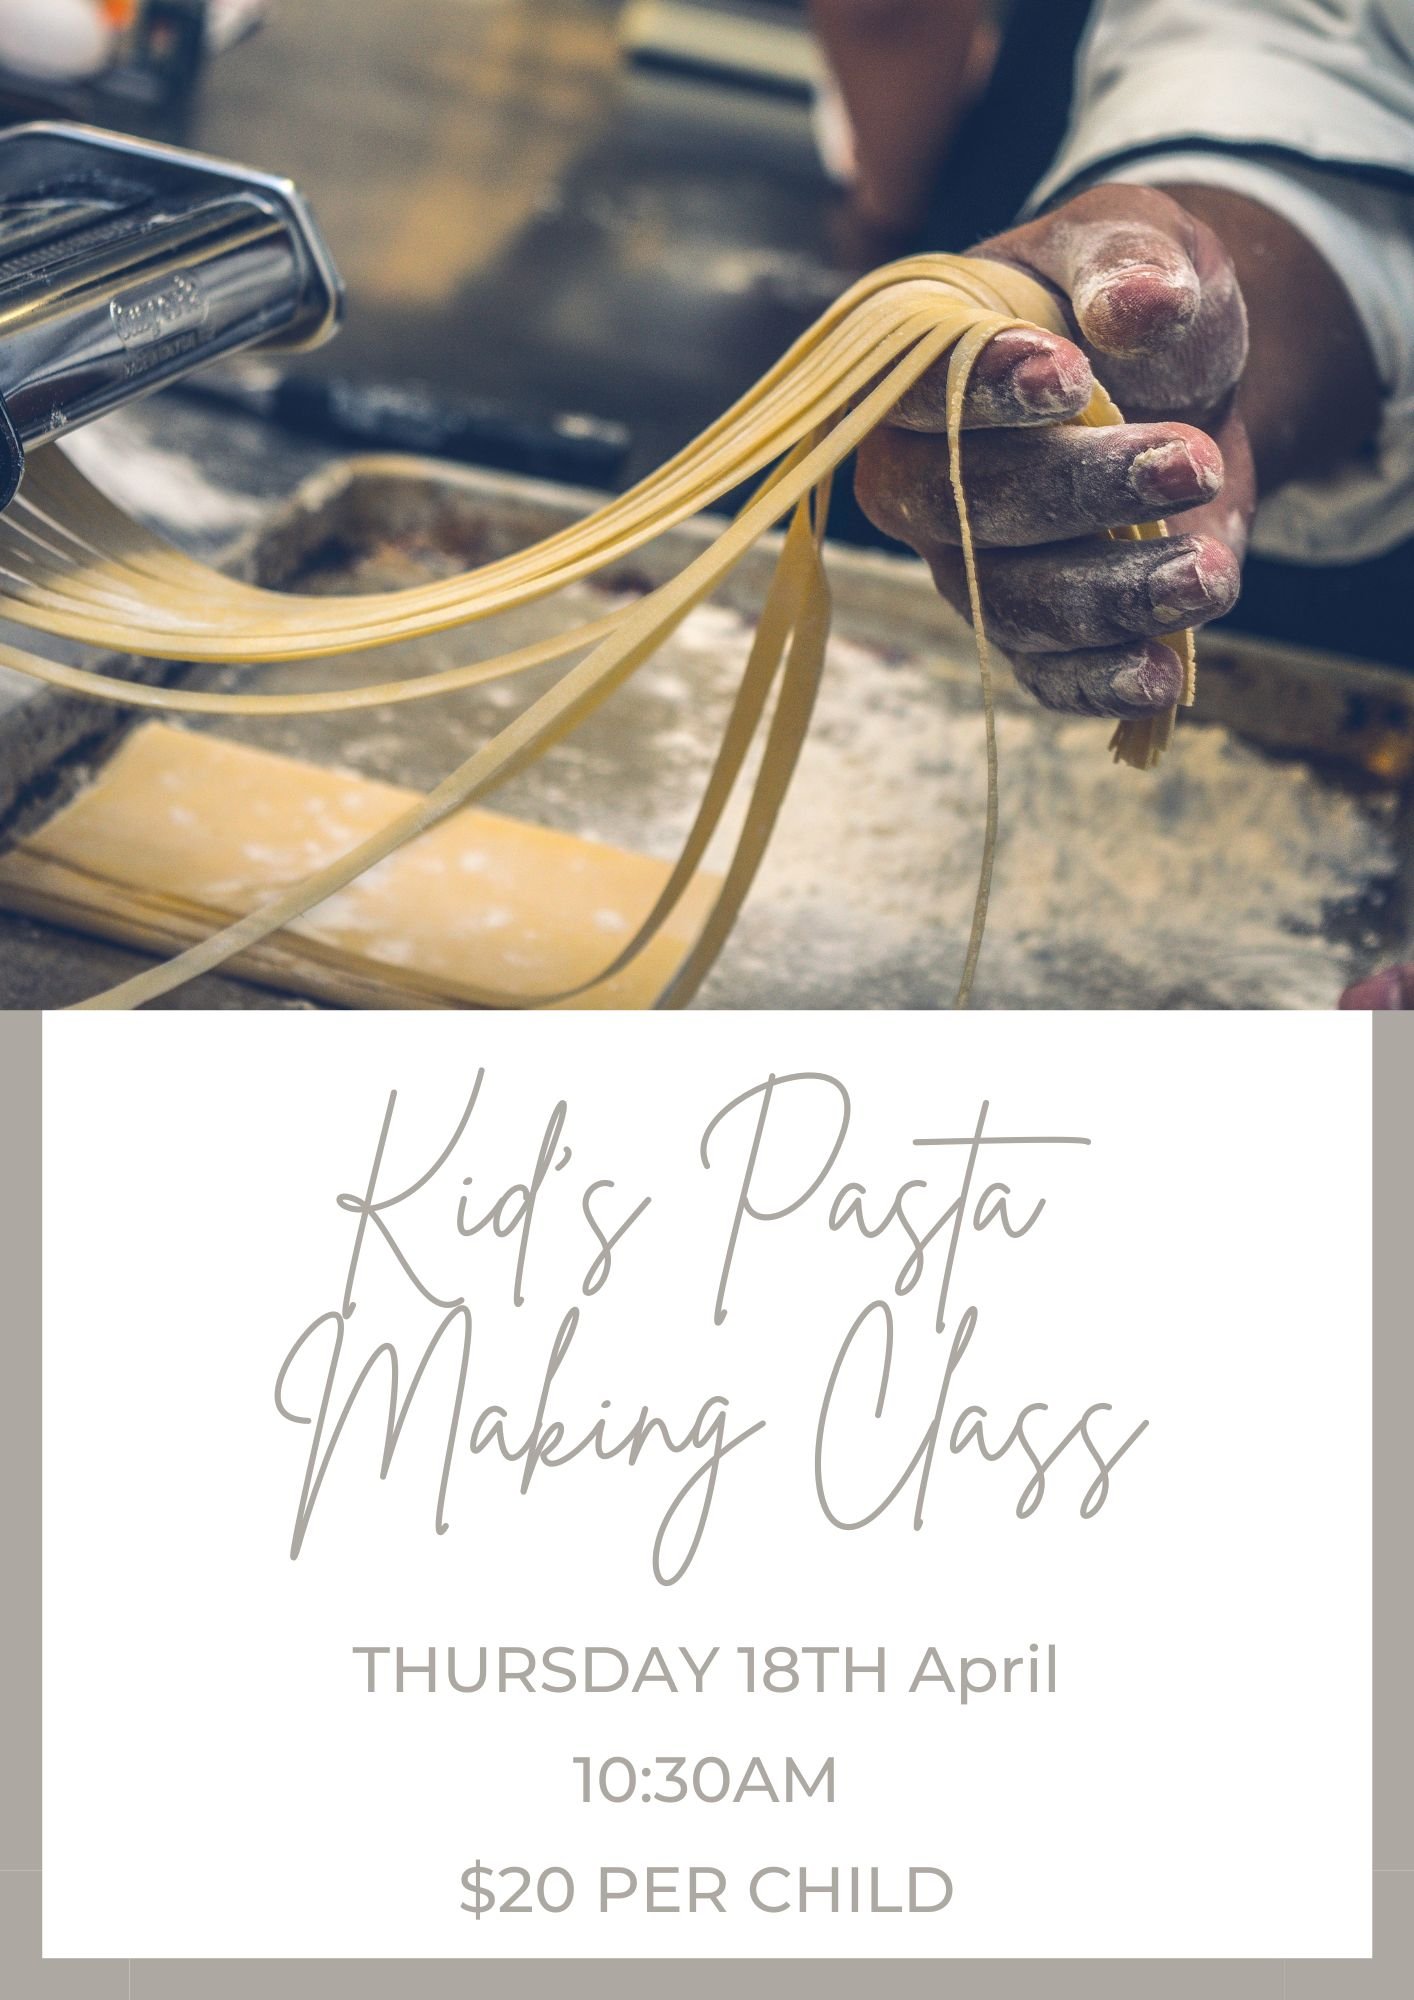 Don't Miss Out! Our Kids Pasta Day on the 18th of April is selling out fast.
If you would like your kids to attend please message Kris at drink@ridgeview.com.au or message us here to book them in.

 #huntervalleywinecountry #discoverhuntervalley #sch